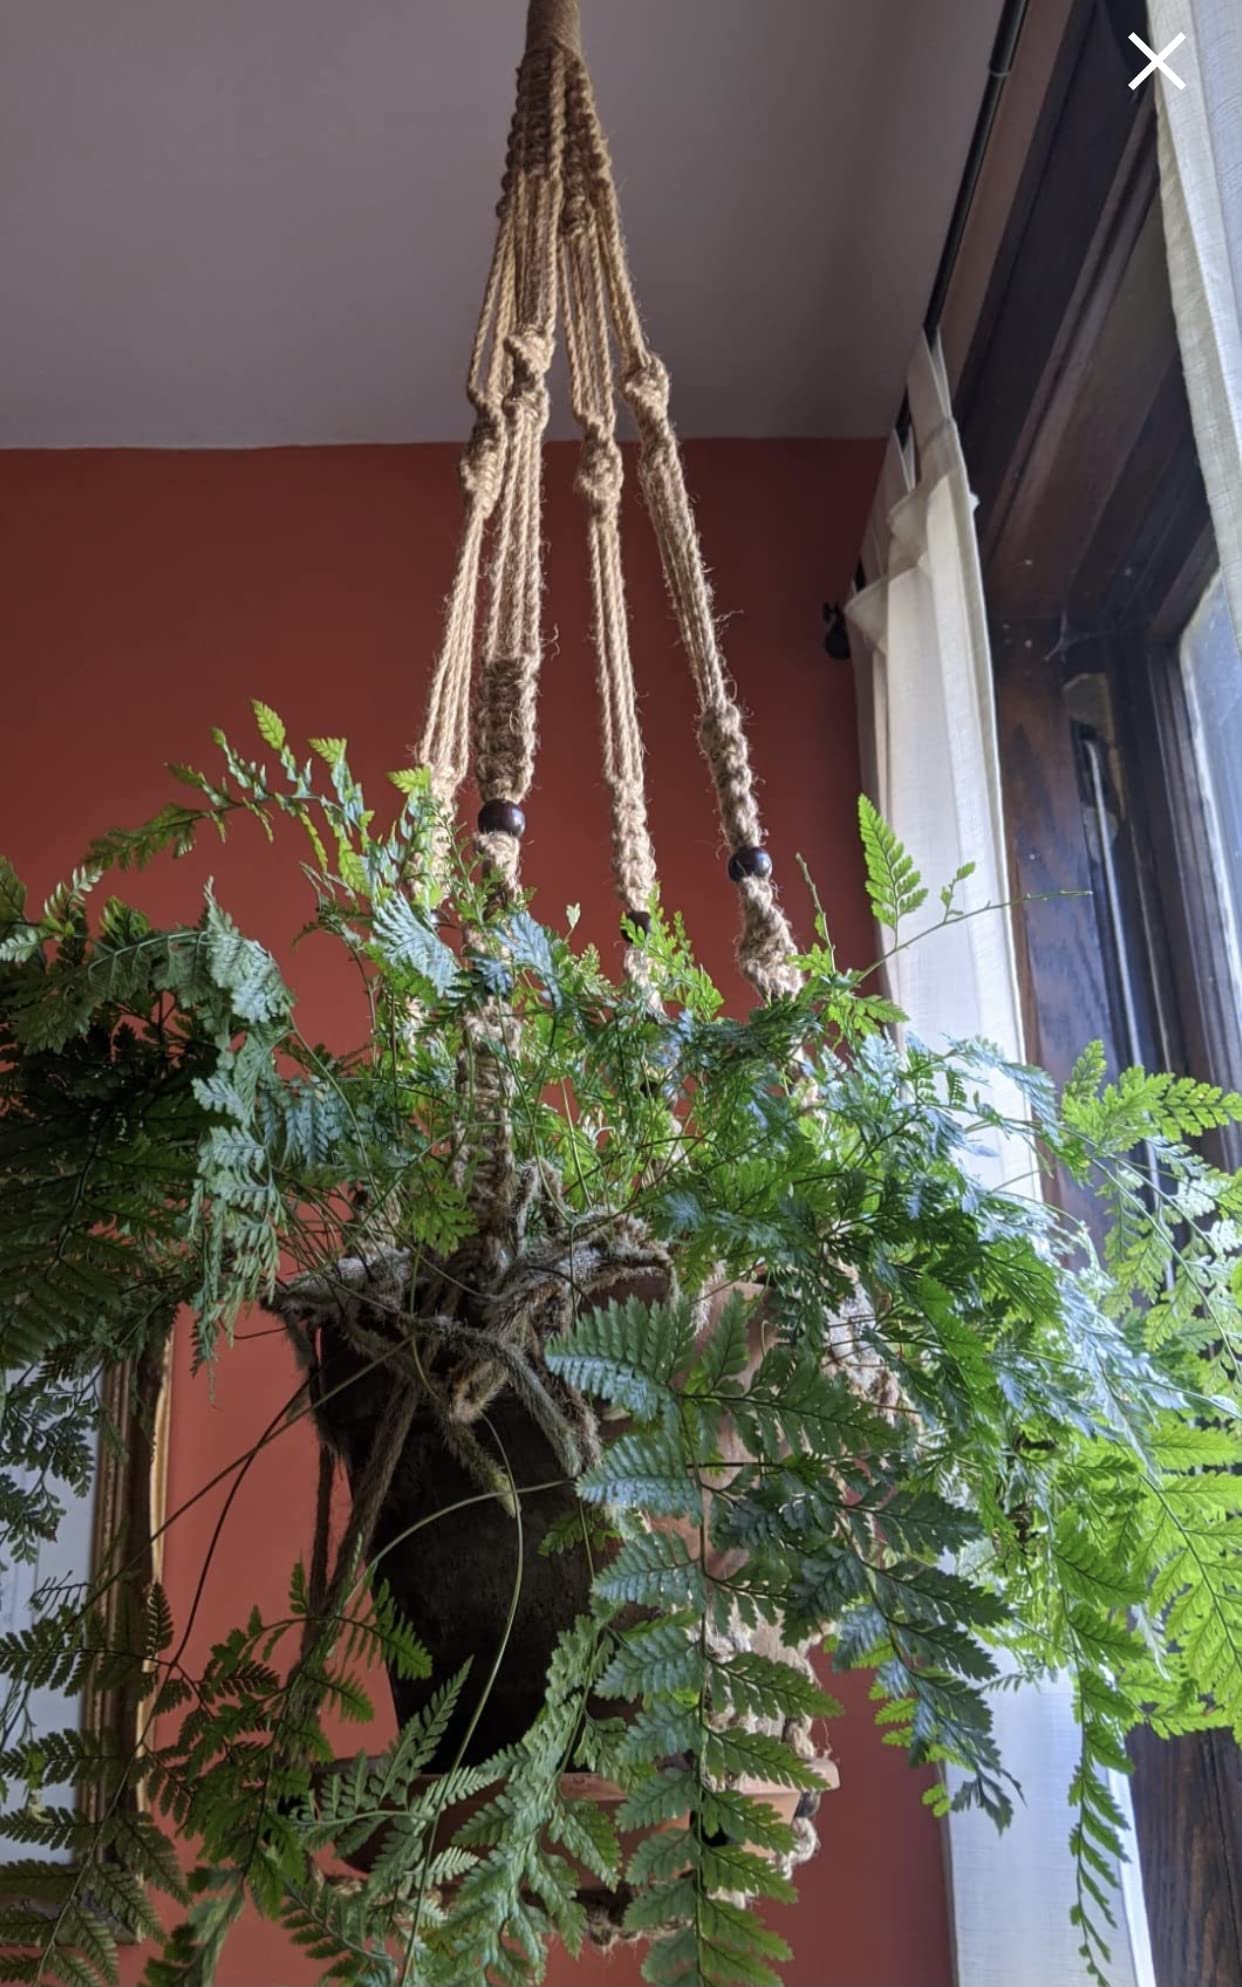 Shineloha 43 Inches Macrame Planter Hanger Large for 12 inch Pot + Swag Hook (Extra Long & Big) | No Tassel, Cotton Rope | Hanging Planter for Indoor Plants, NO Pot/Plant Included (Brown)…